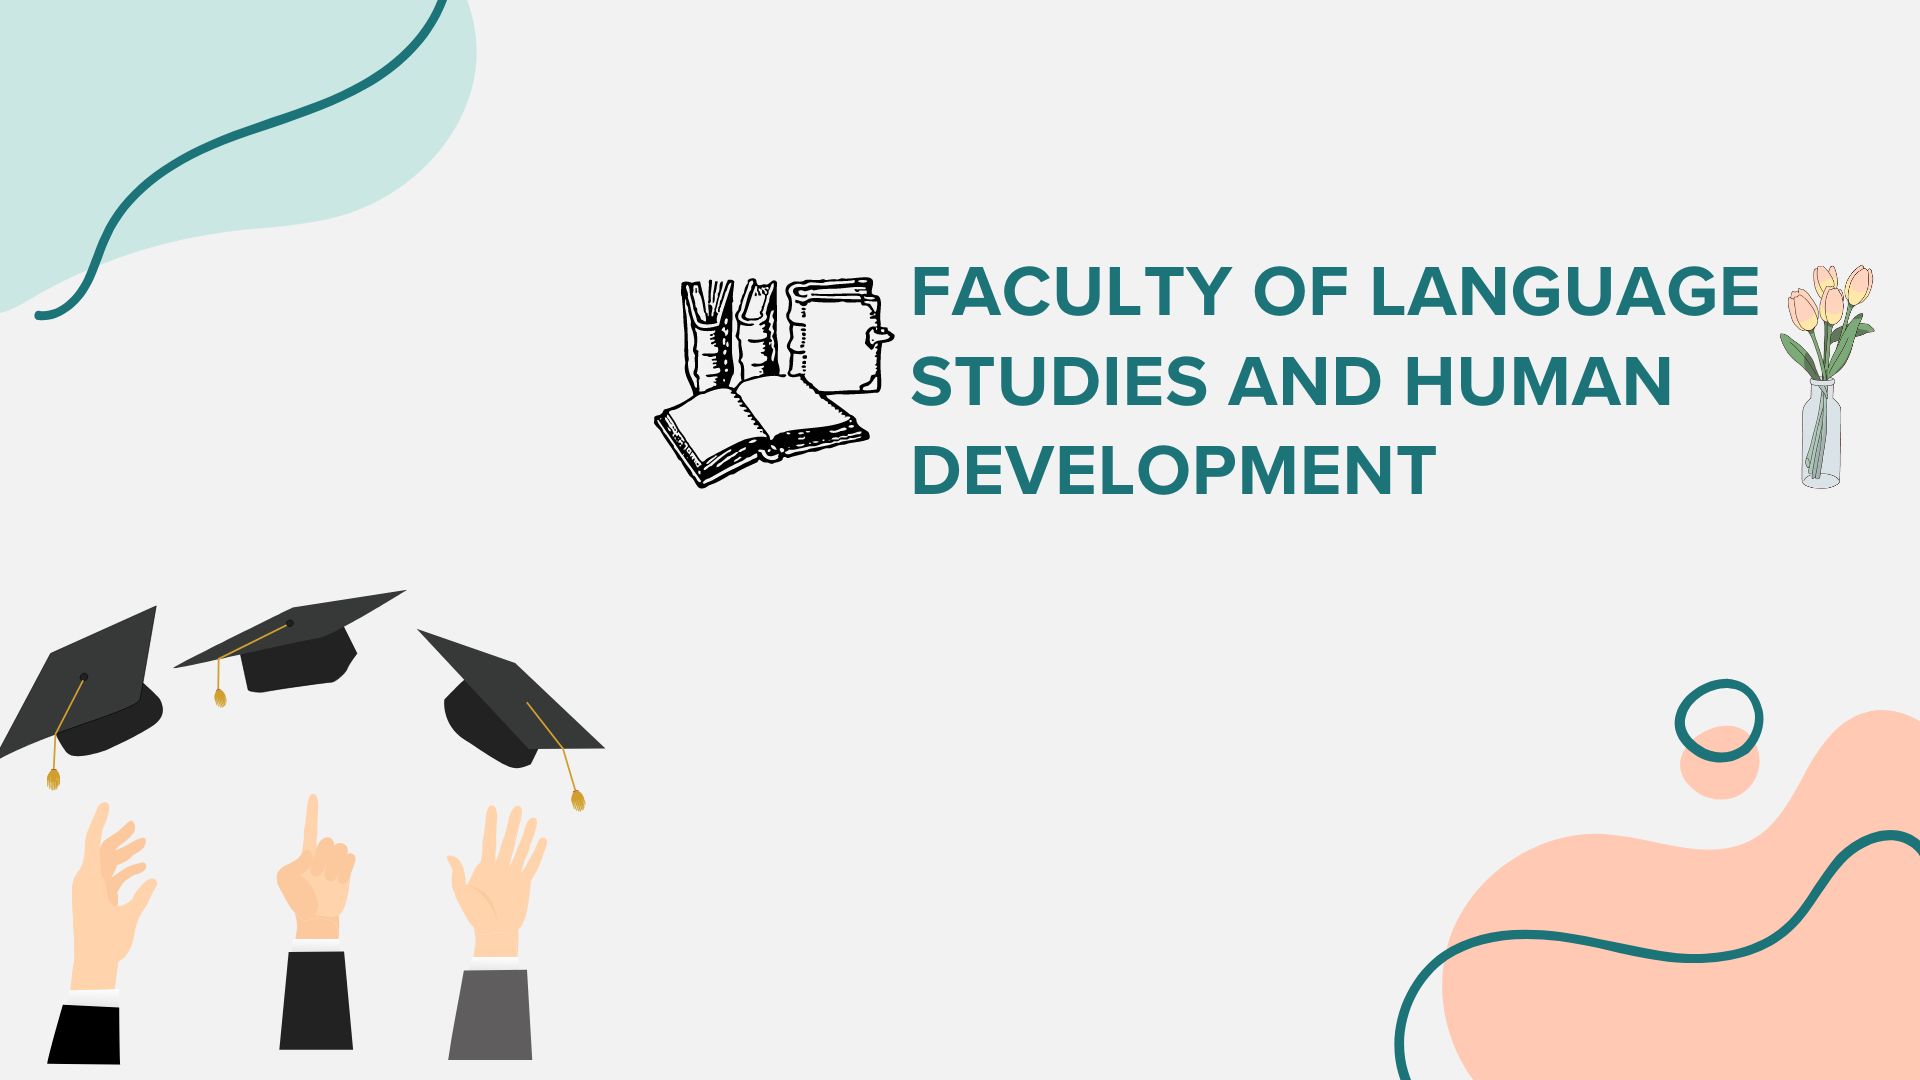 FACULTY OF LANGUAGE STUDIES AND HUMAN DEVELOPMENT 